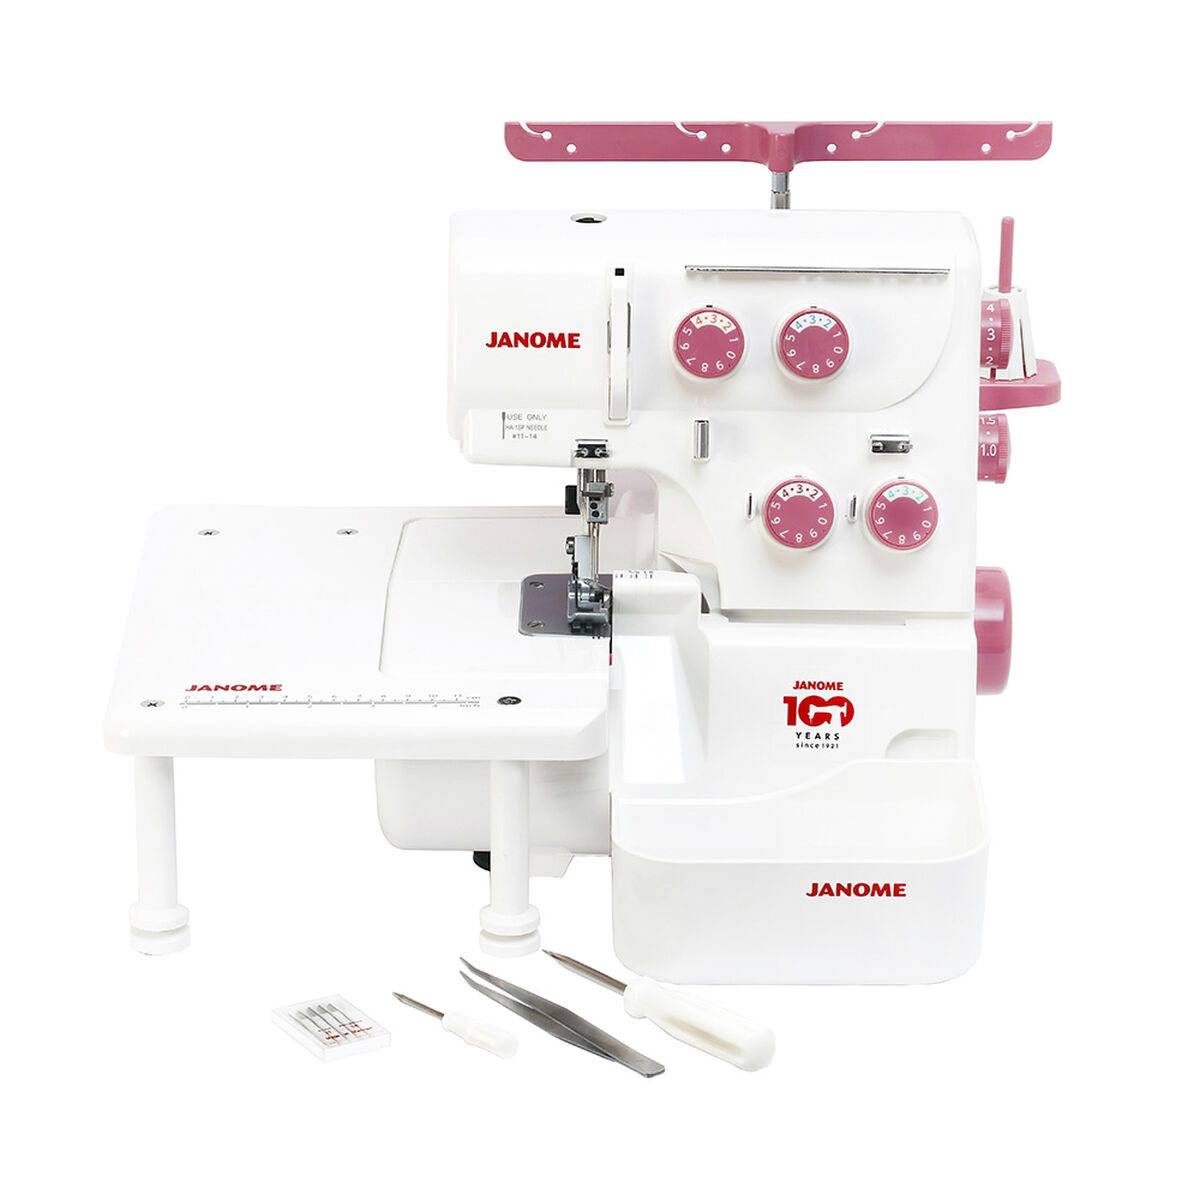 JANOME 792 PG